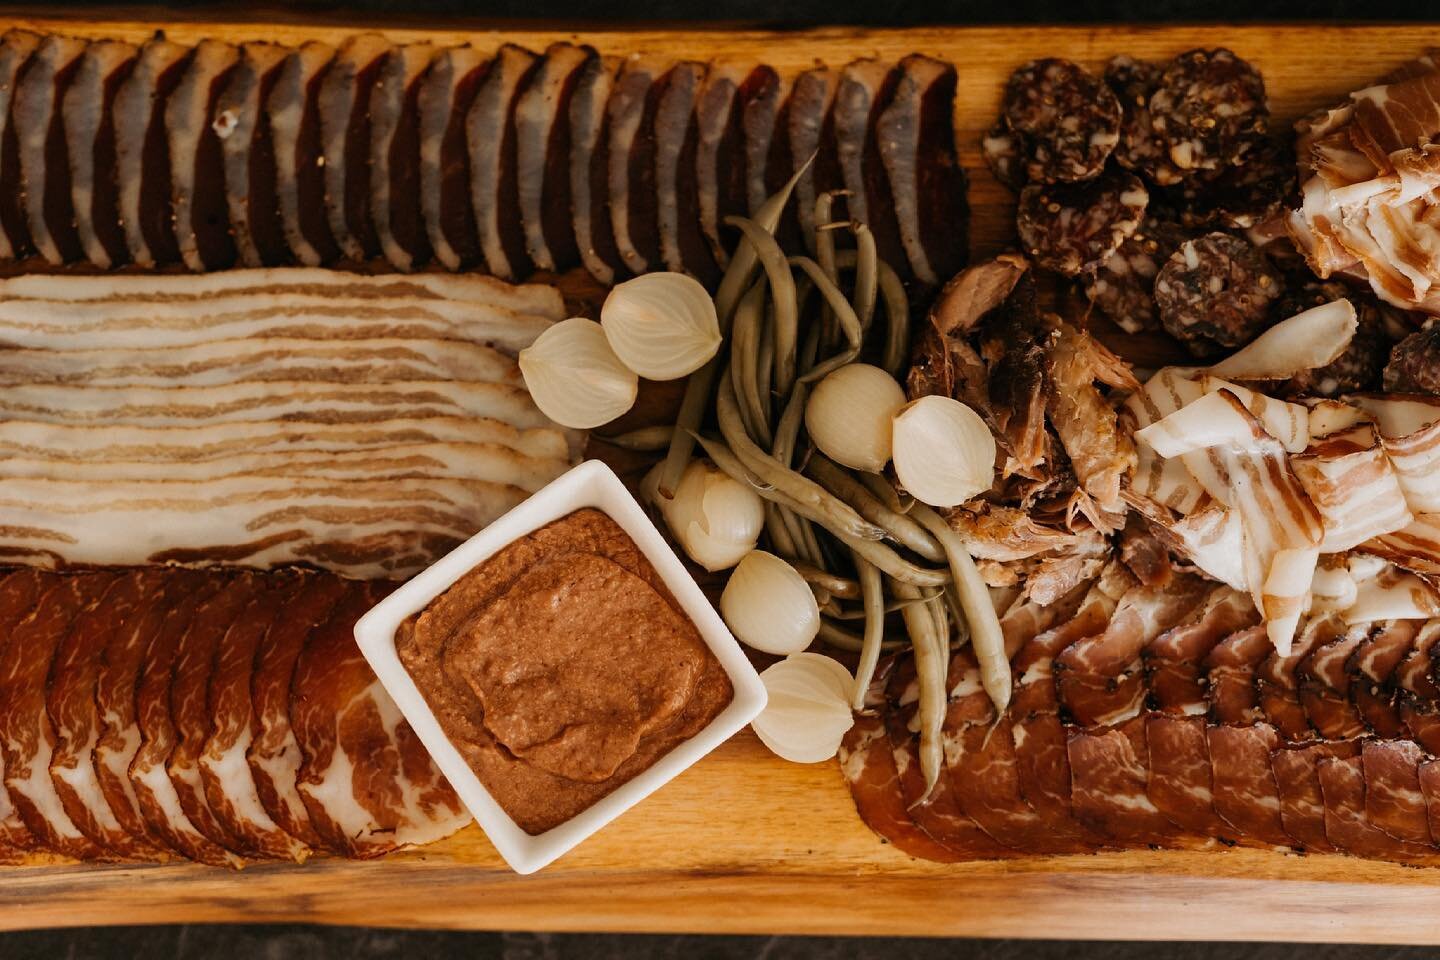 Happy Wednesday, Friends!

We may or may not celebrate today with some midday charcuterie.
Cheers to entering Ontario&rsquo;s opening Stage ✌🏼 
.
.
.
#gatherniagara #gathercatering #niagaracaterer #privateeventchef #privatedinner #weddingseason #nia